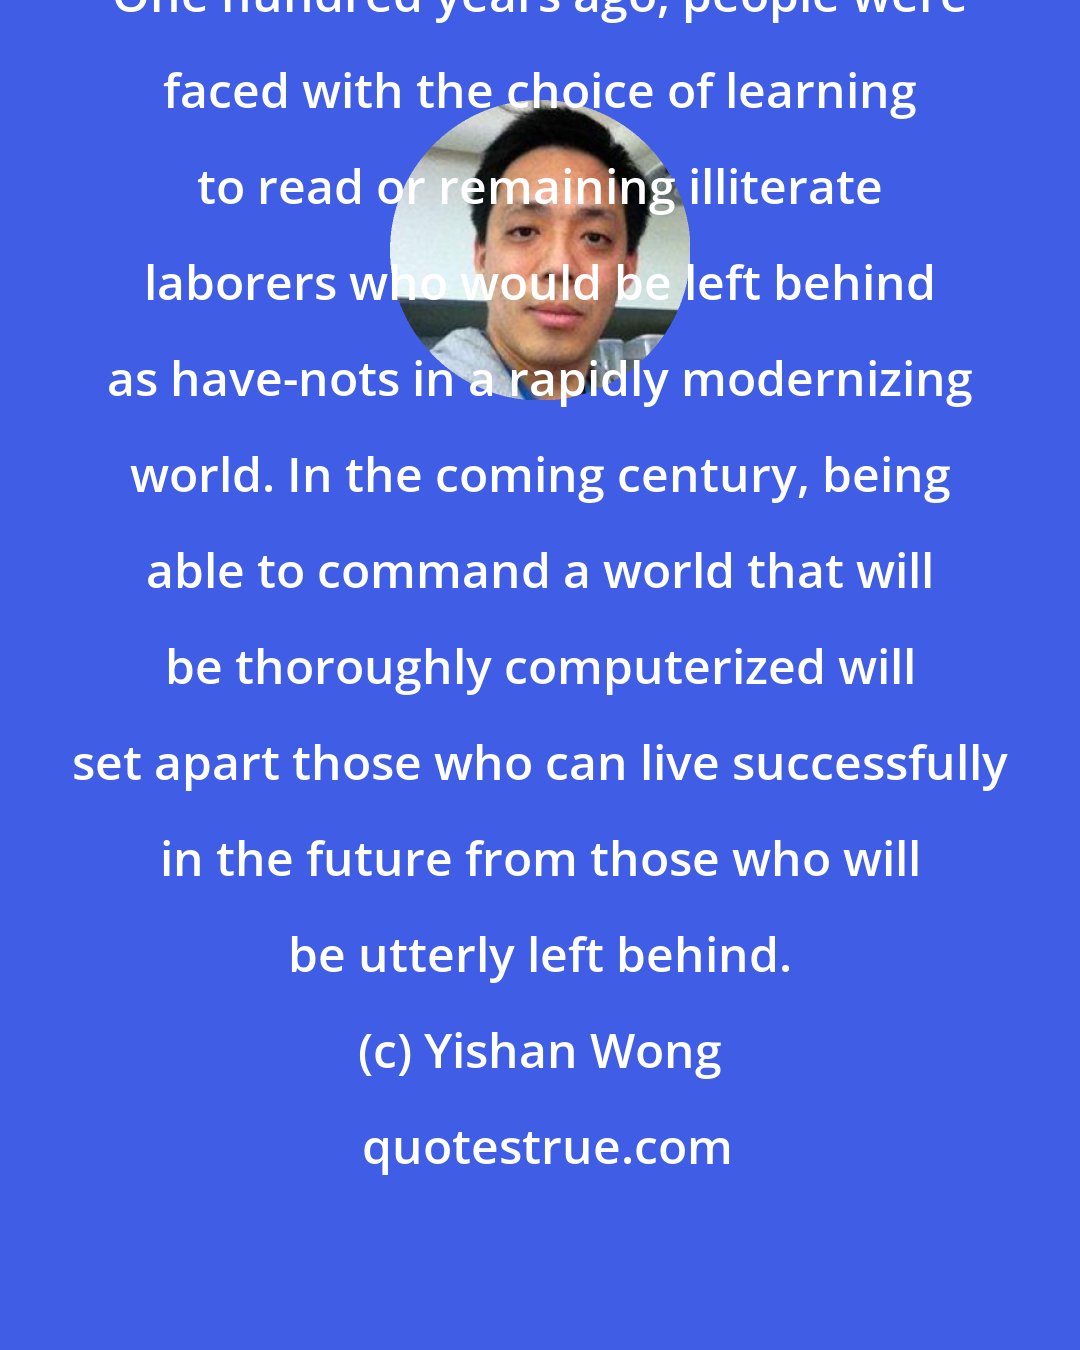 Yishan Wong: One hundred years ago, people were faced with the choice of learning to read or remaining illiterate laborers who would be left behind as have-nots in a rapidly modernizing world. In the coming century, being able to command a world that will be thoroughly computerized will set apart those who can live successfully in the future from those who will be utterly left behind.